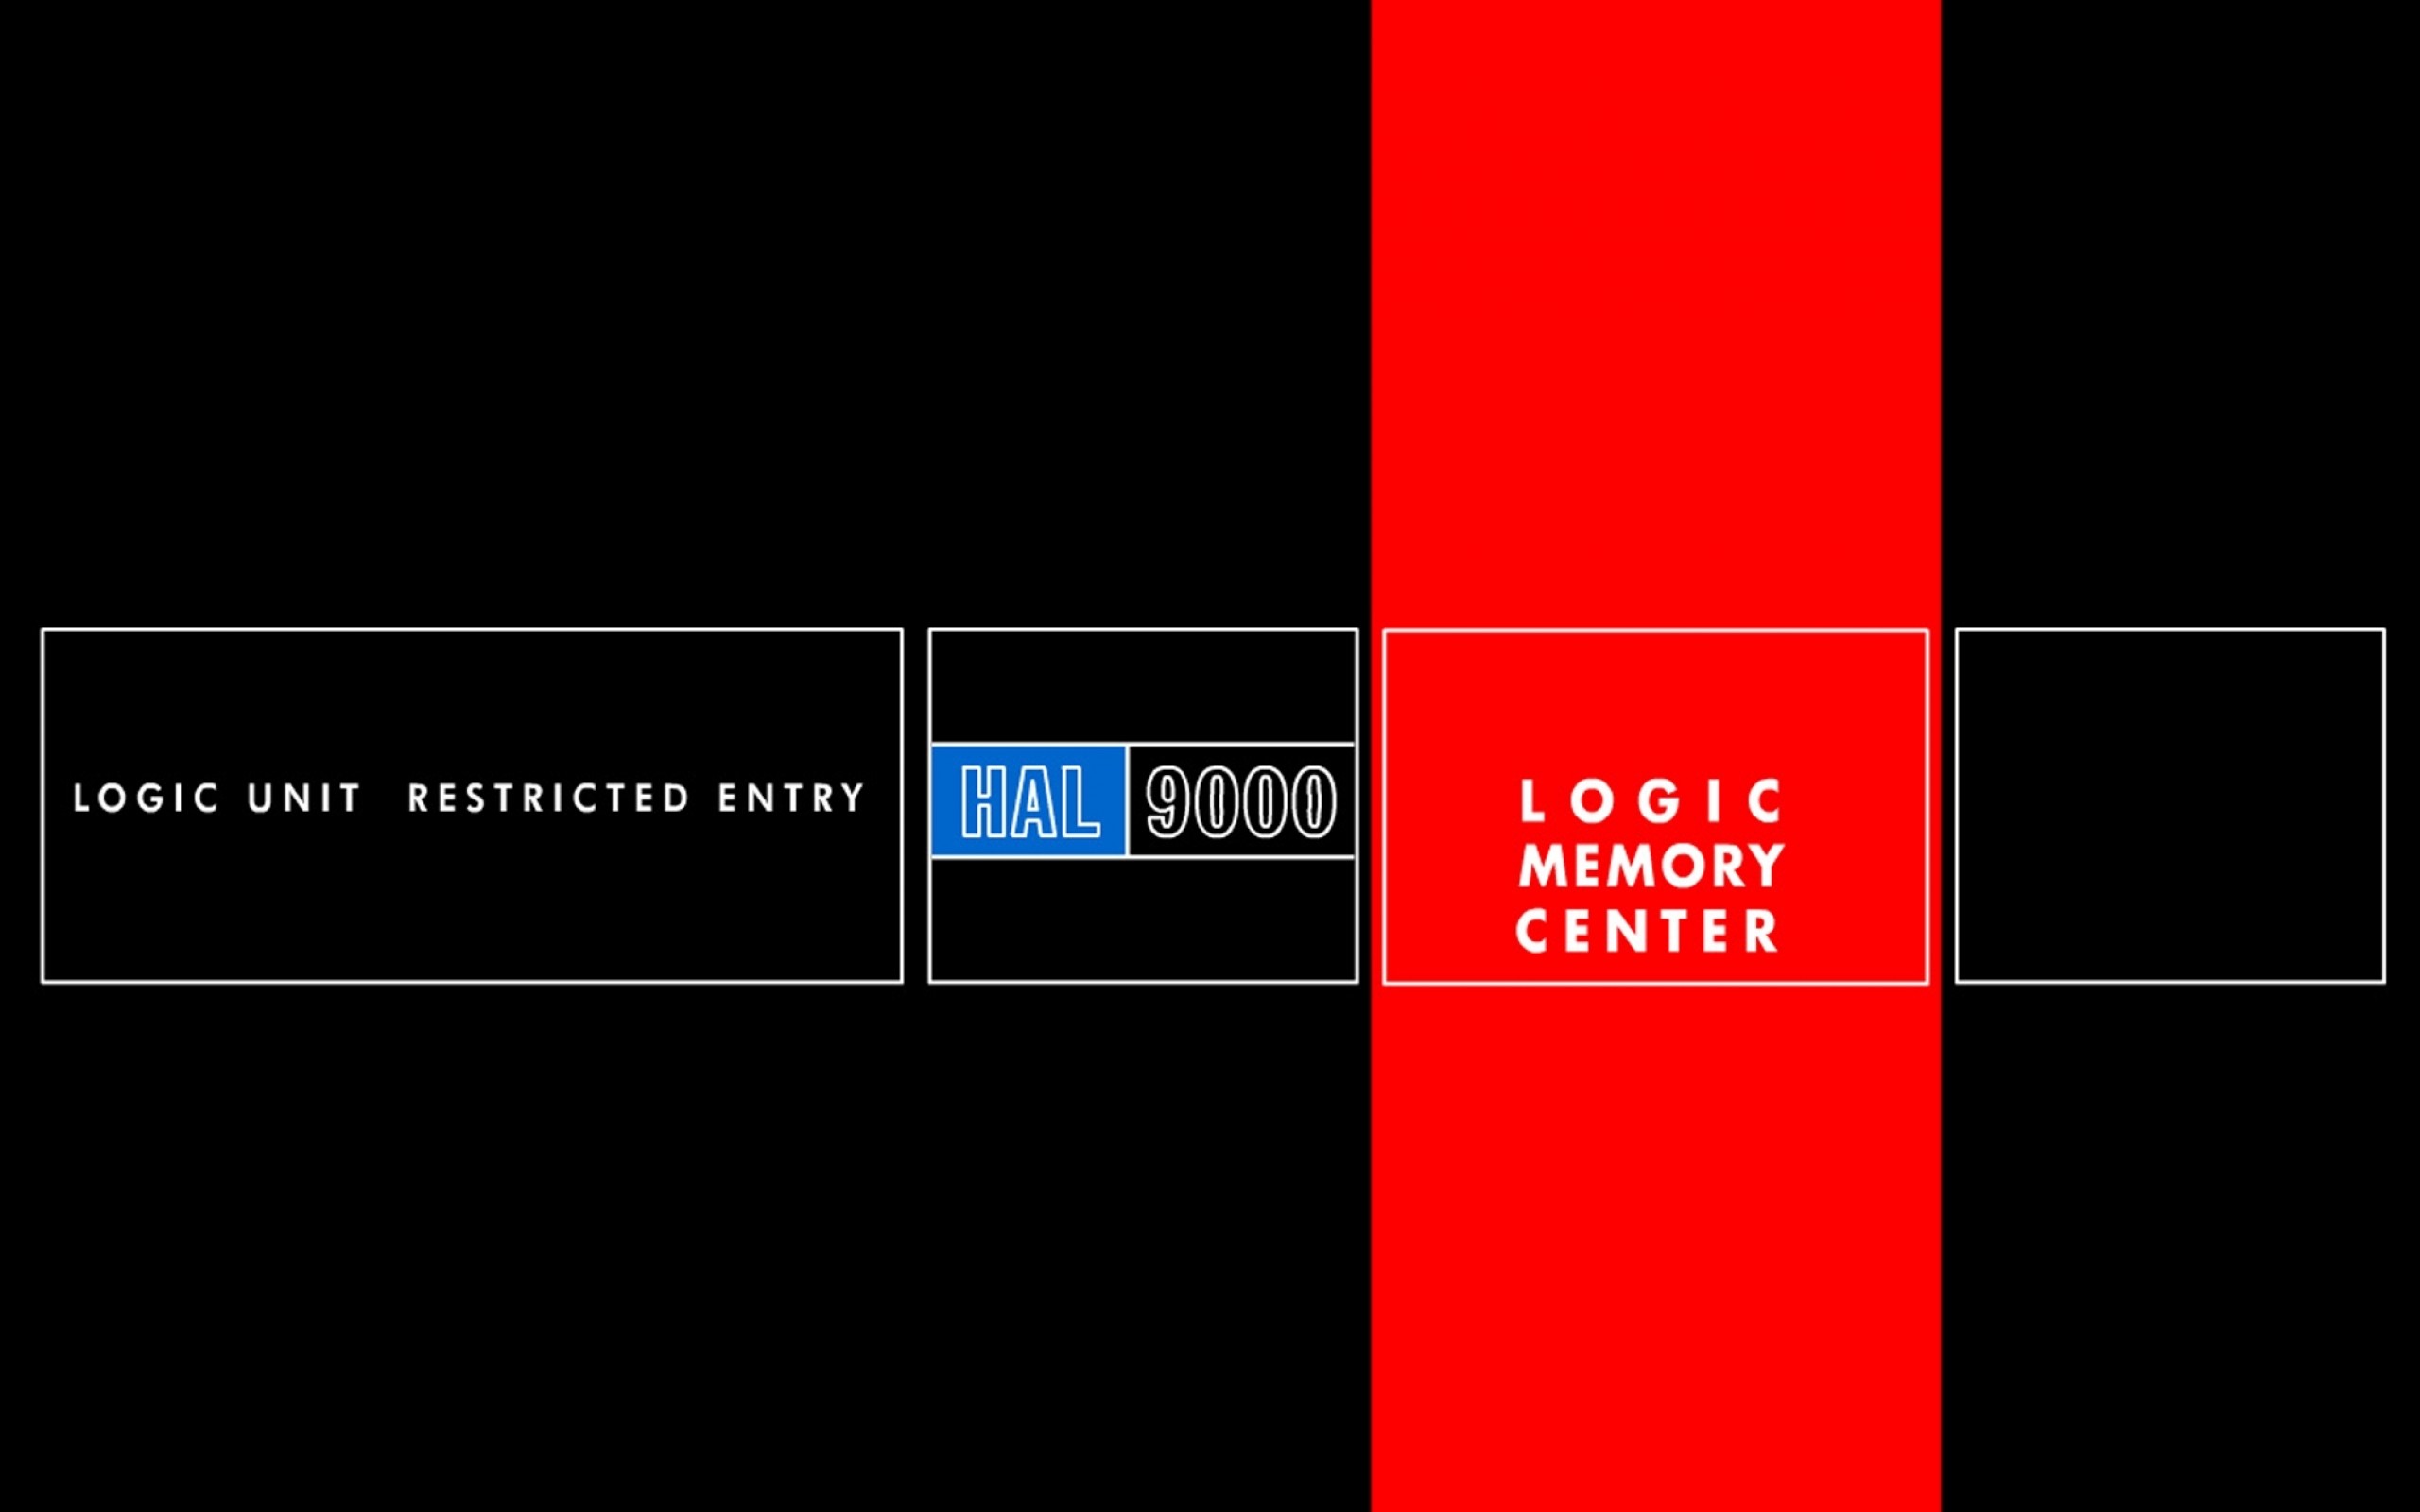 General 2560x1600 2001: A Space Odyssey HAL 9000 movies Stanley Kubrick artificial intelligence logic science fiction